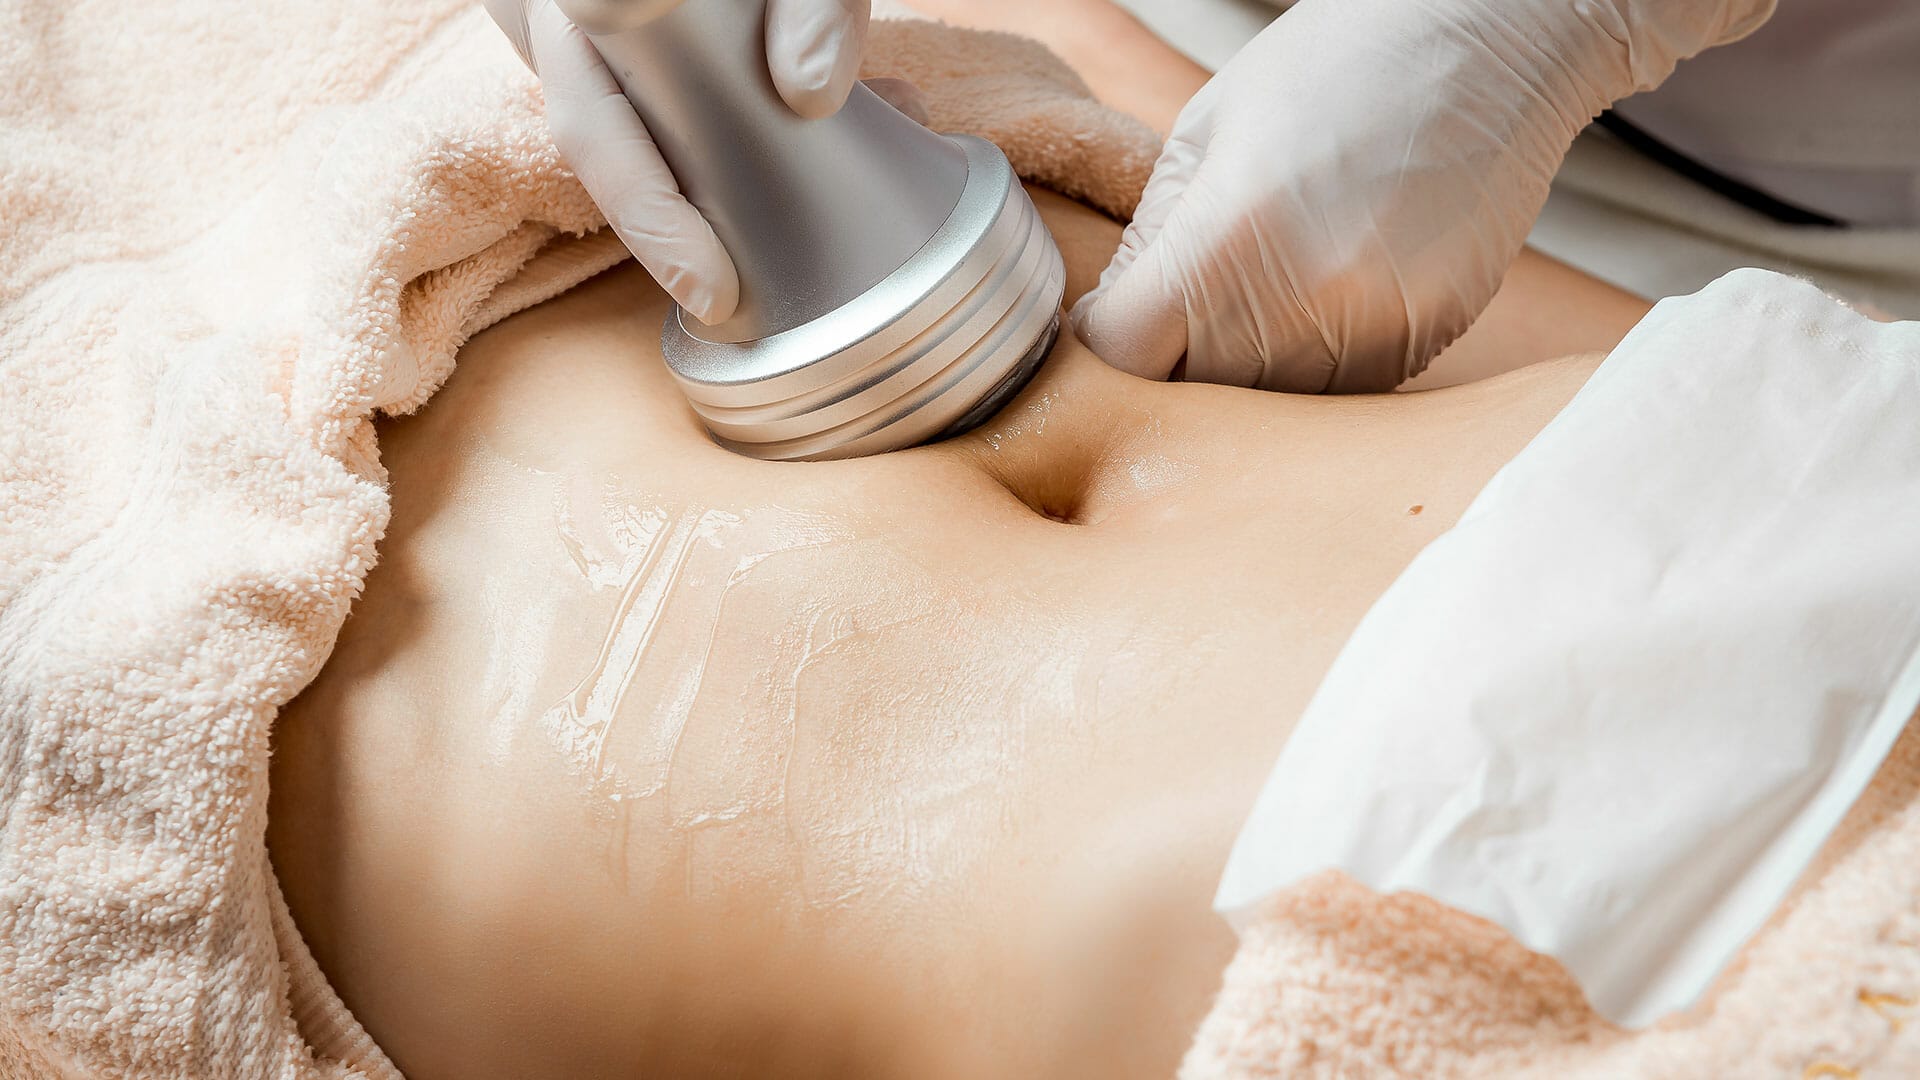 A woman getting non-invasive body sculpting treatment in a laser skin and hair care center.